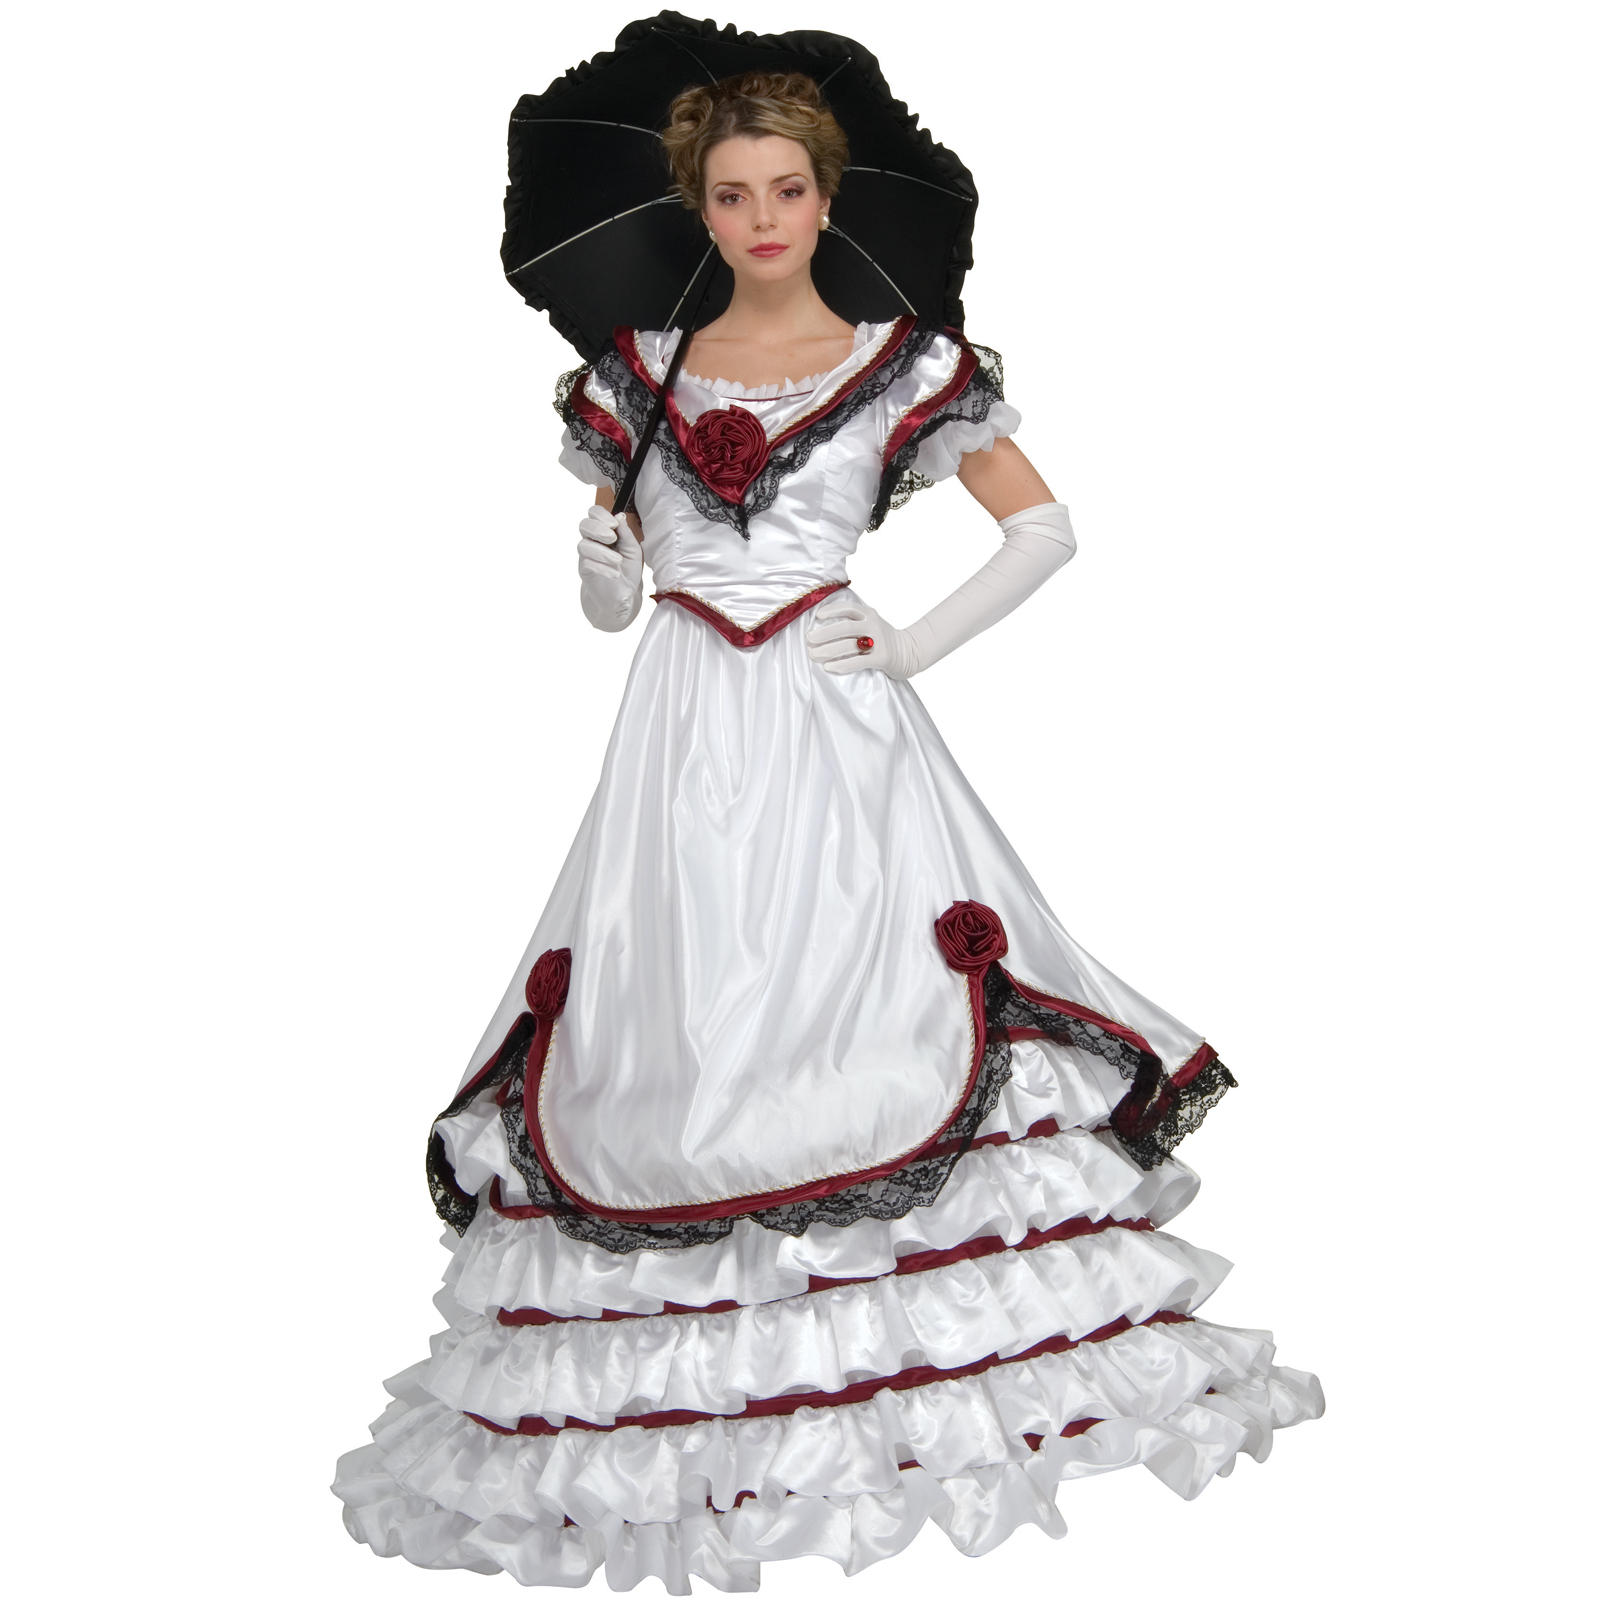 Rubie's Costume Co Women's Southern Belle Grand Heritage Collection Adult Costume - Large